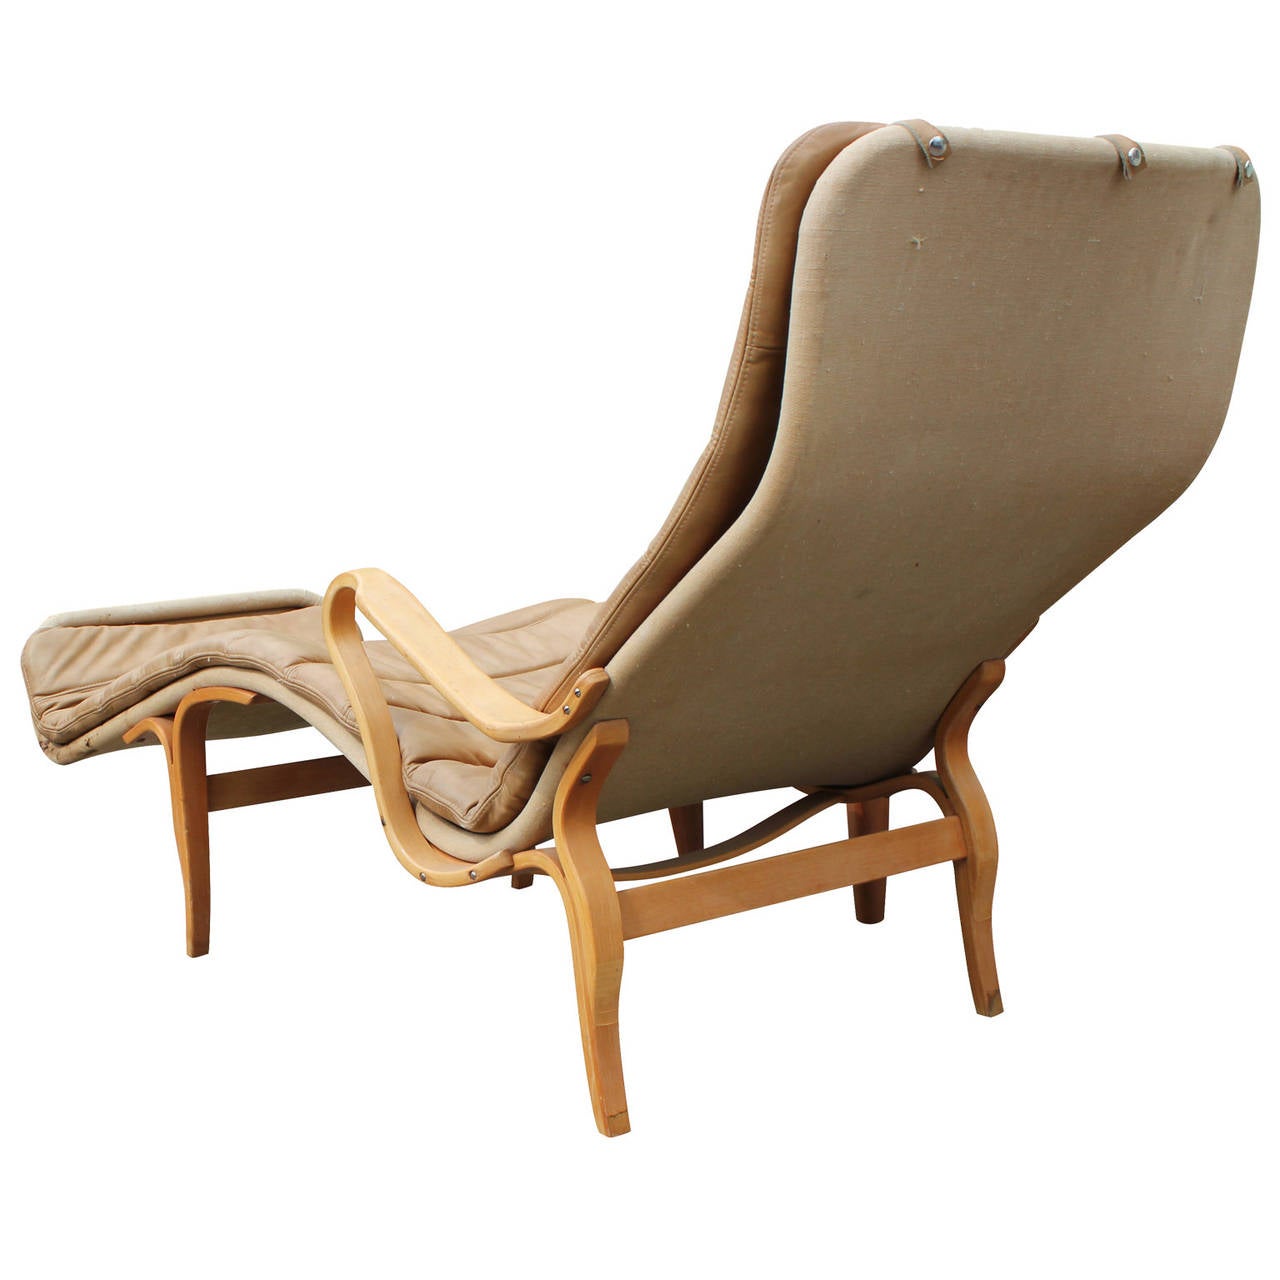 Mid-20th Century Bruno Mathsson for Dux Pernille Three Chaise Longue Chair in Neutral Leather